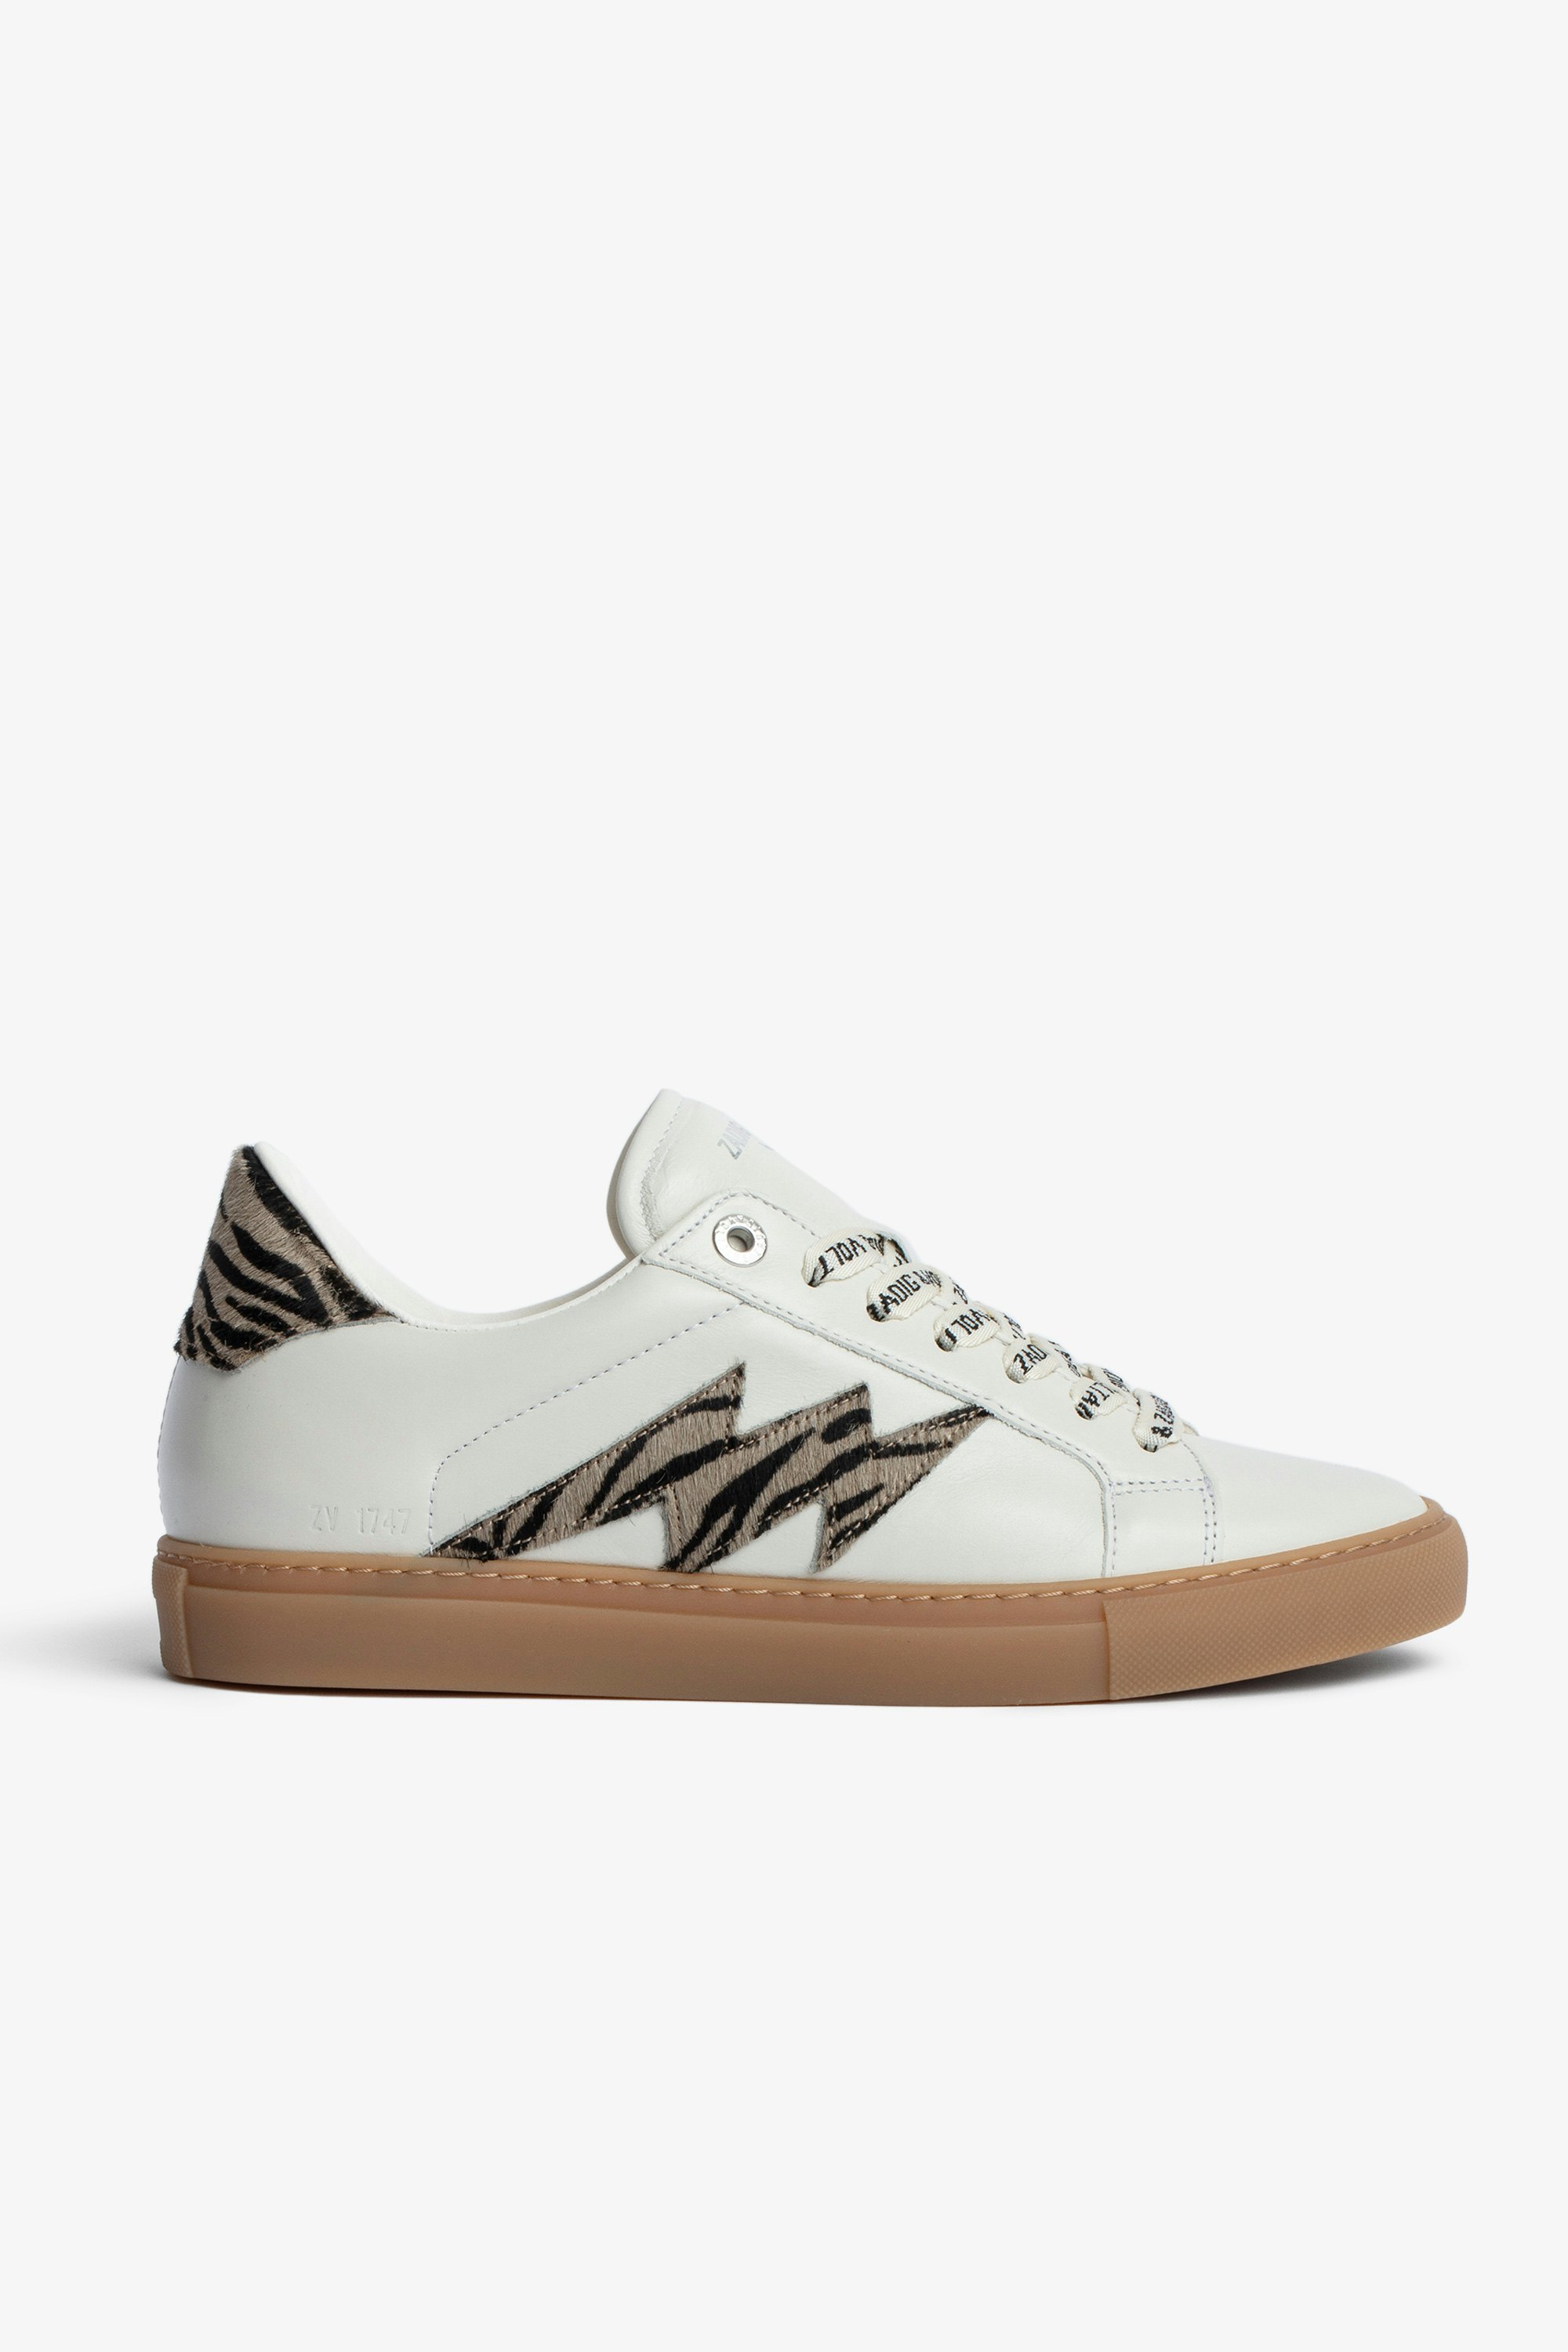 ZV1747 スニーカー Women’s white leather low-top sneakers with zebra-print panels